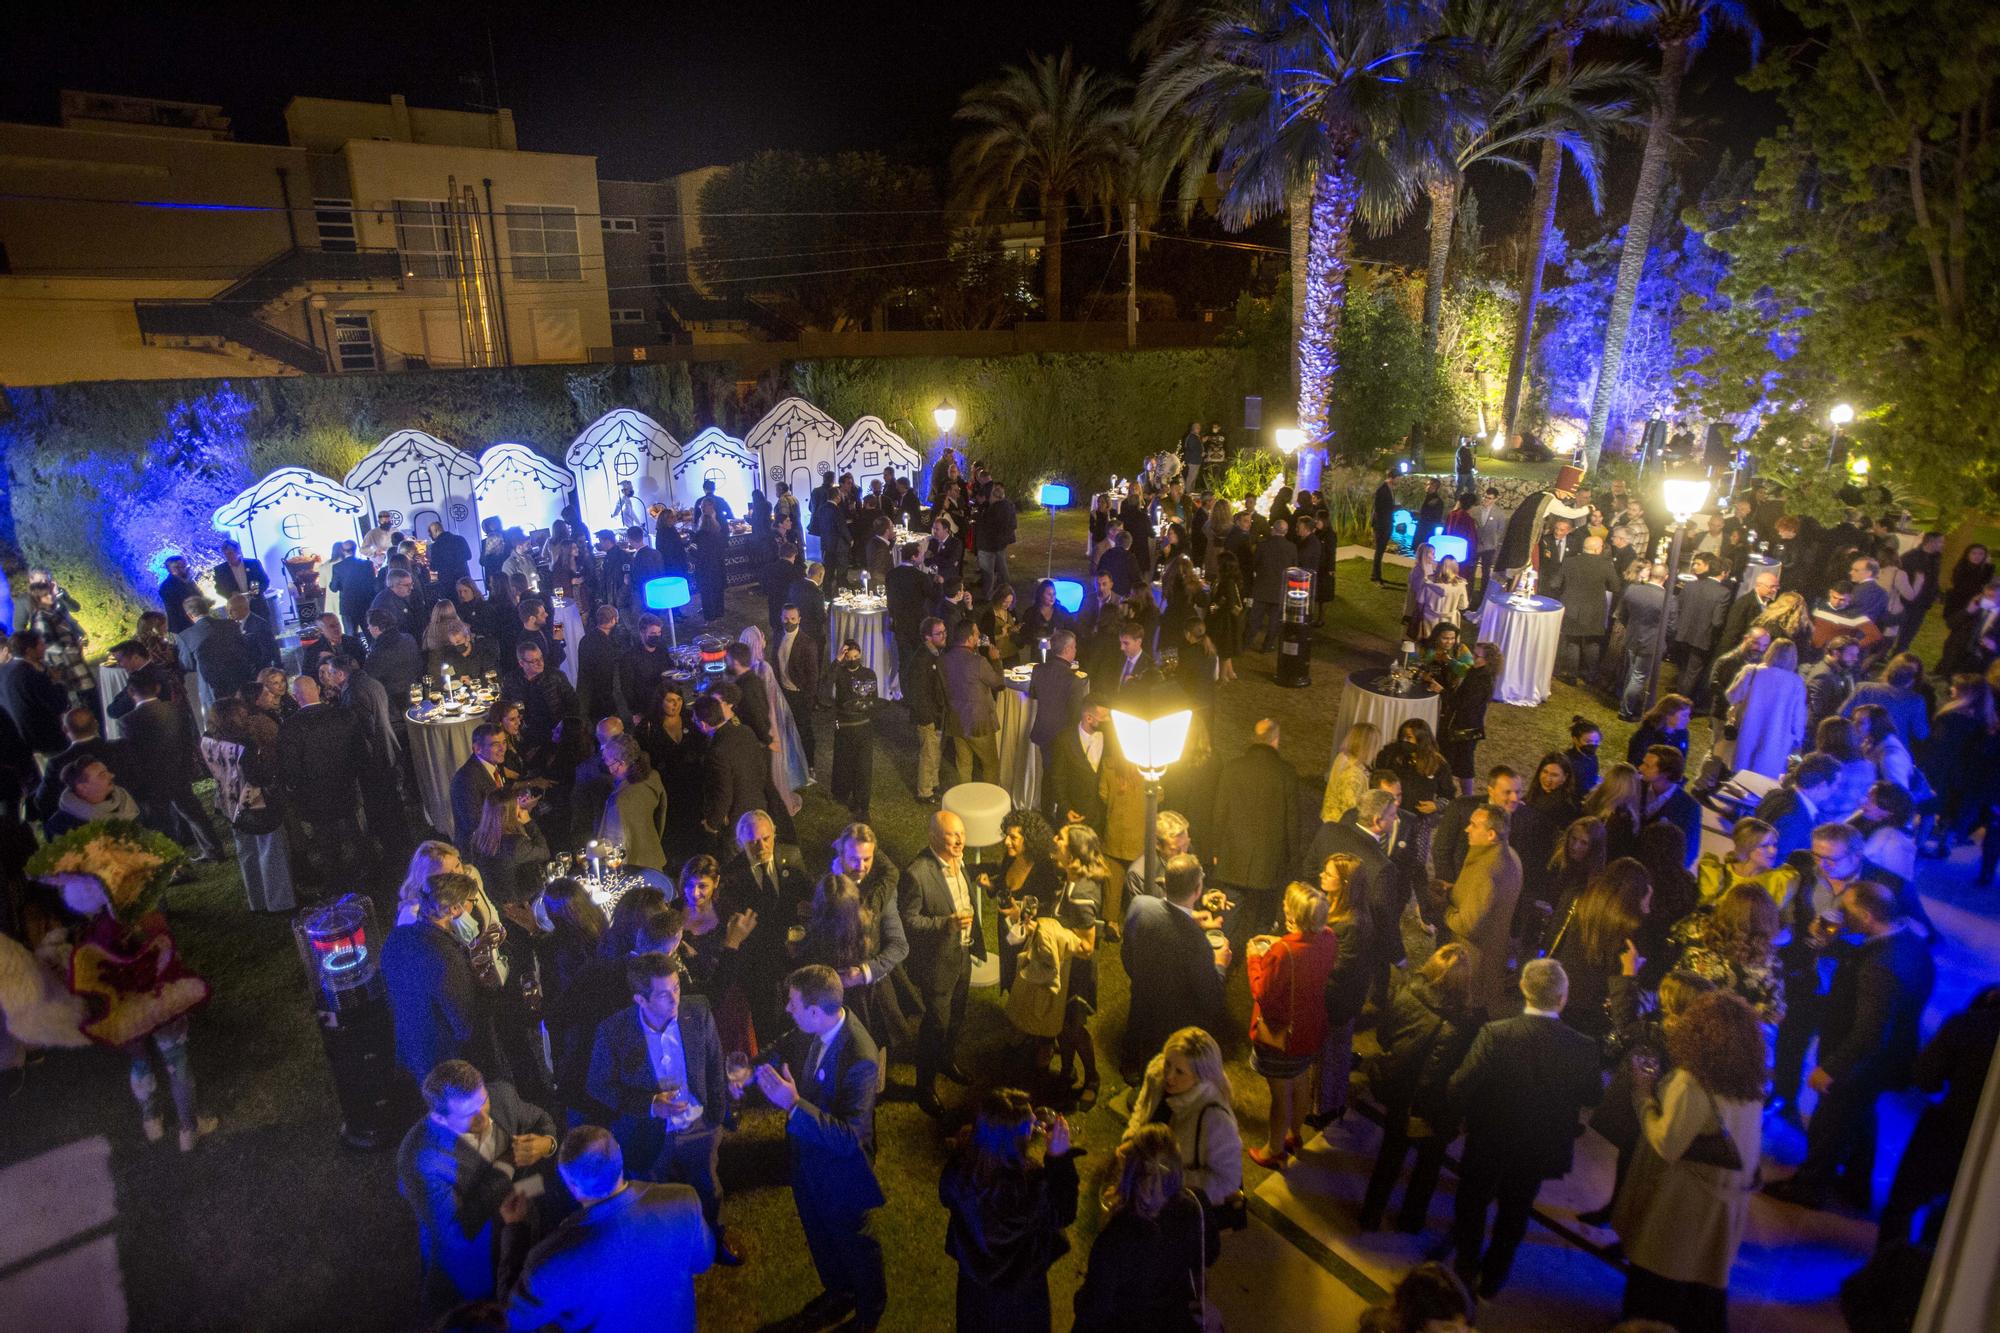 600 people welcome Christmas at the Vectalia charity cocktail